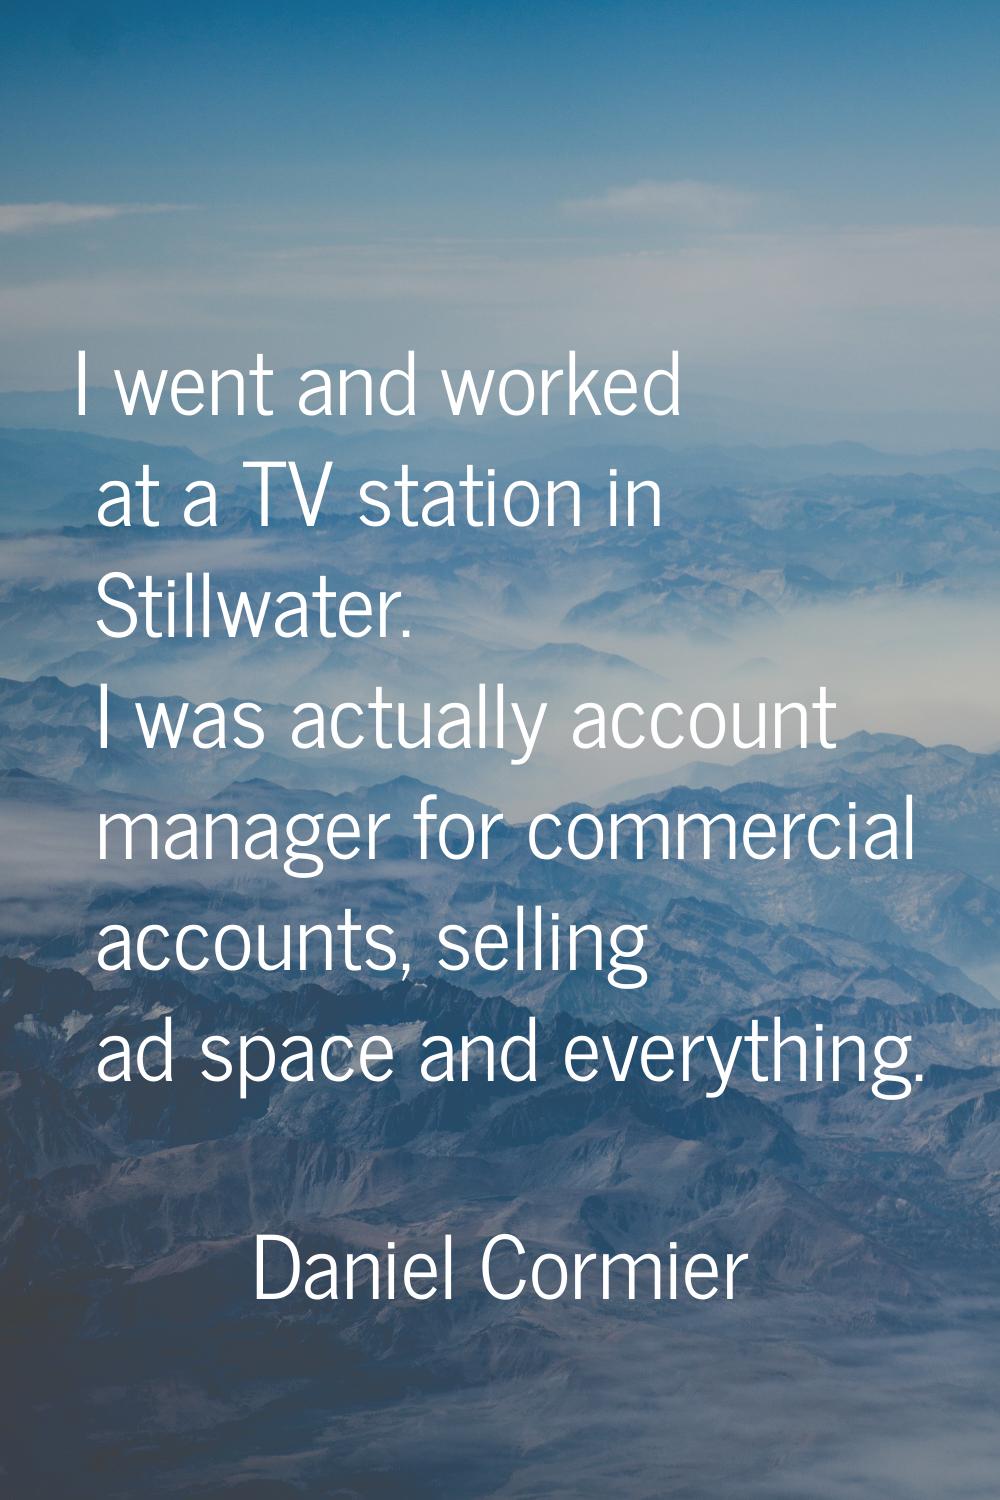 I went and worked at a TV station in Stillwater. I was actually account manager for commercial acco